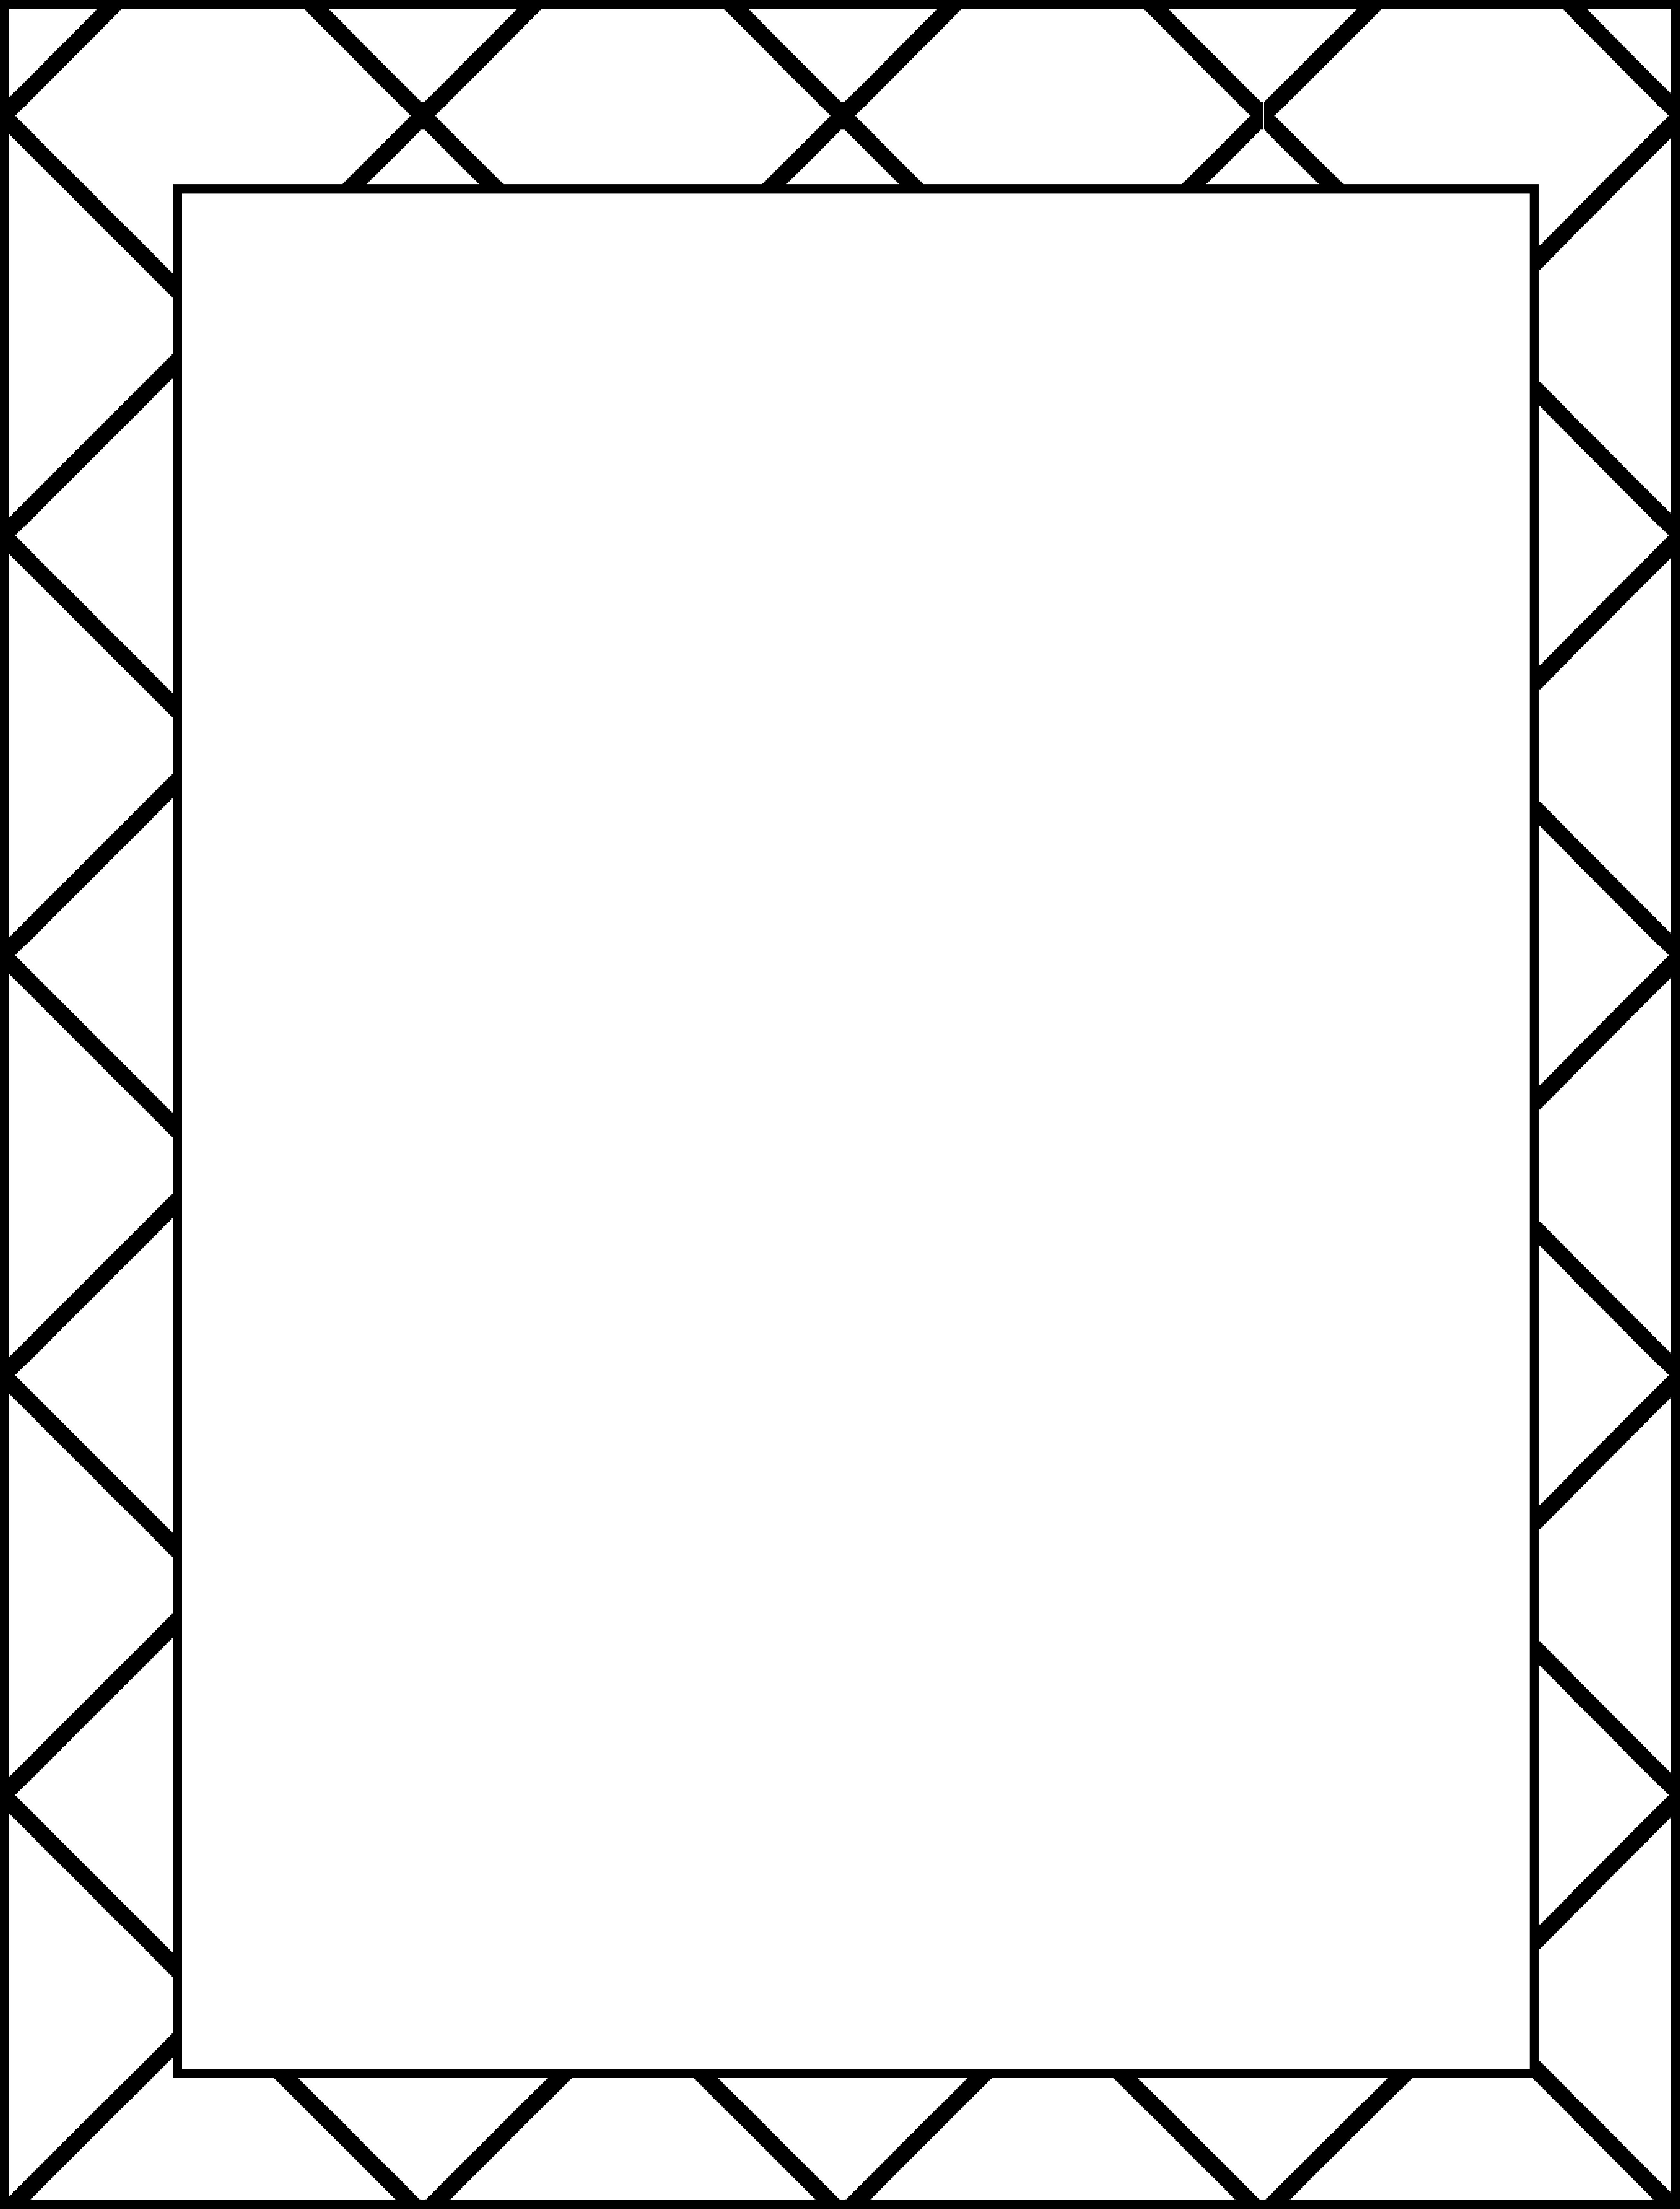 Free Invitation Borders, Download Free Invitation Borders png images ...